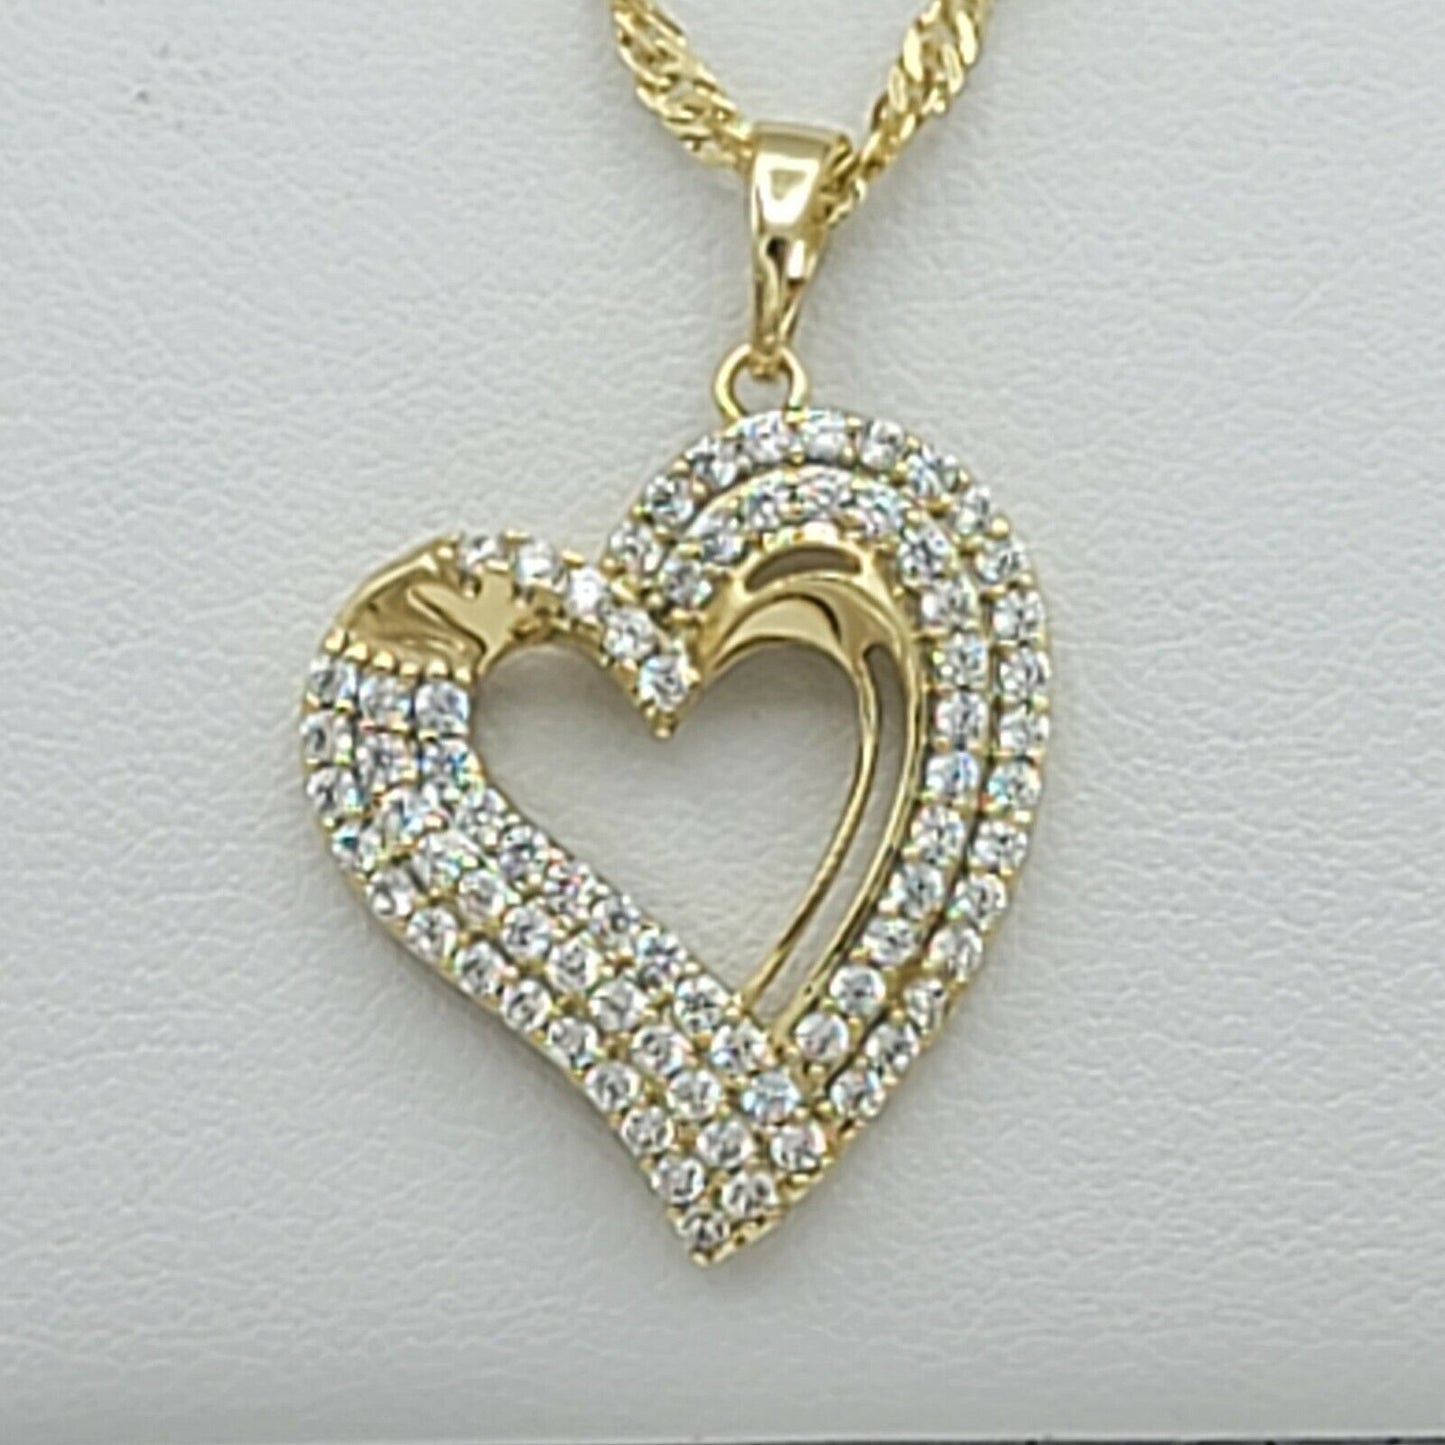 Necklaces - 14K Gold Plated. Crystal Icy CZ LOVE HEART Pendant & Chain.